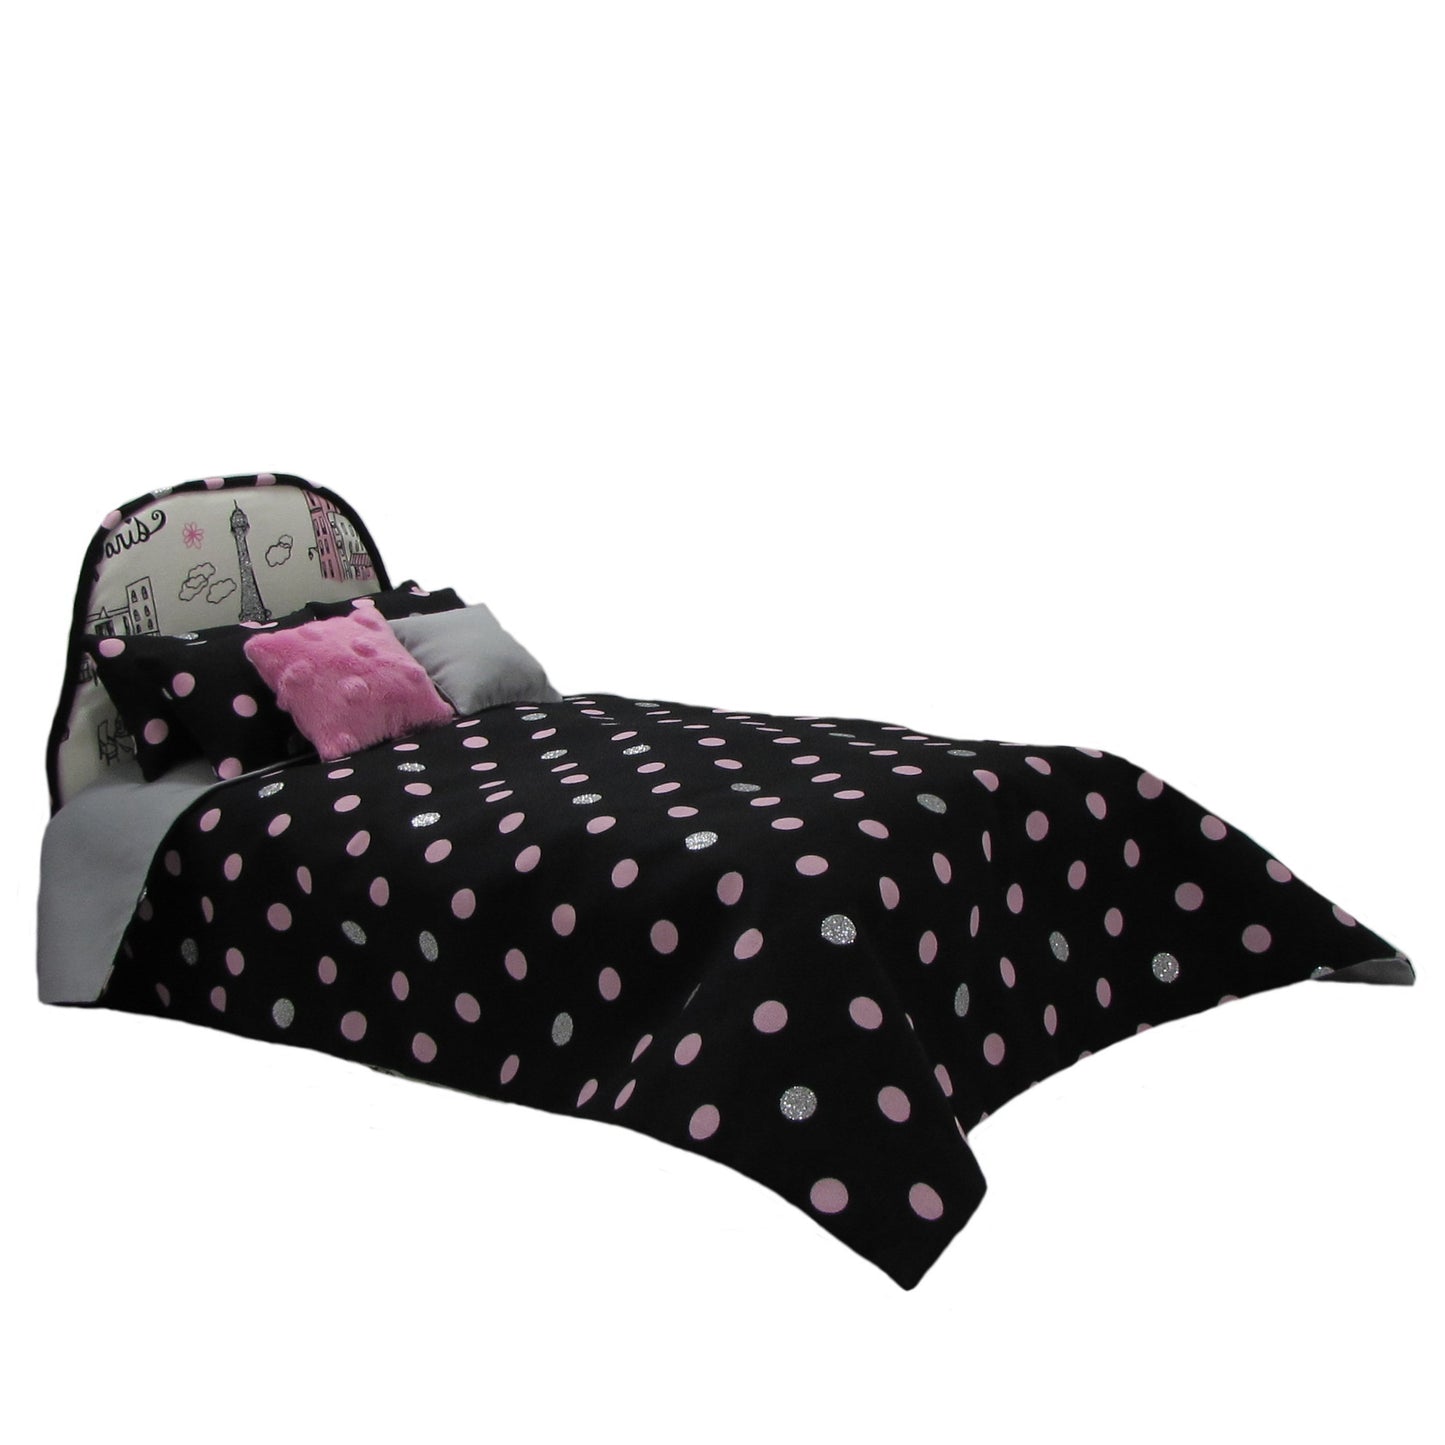 Double Paris Doll Bed and Doll Bedding for 11.5-inch and 12-inch dolls